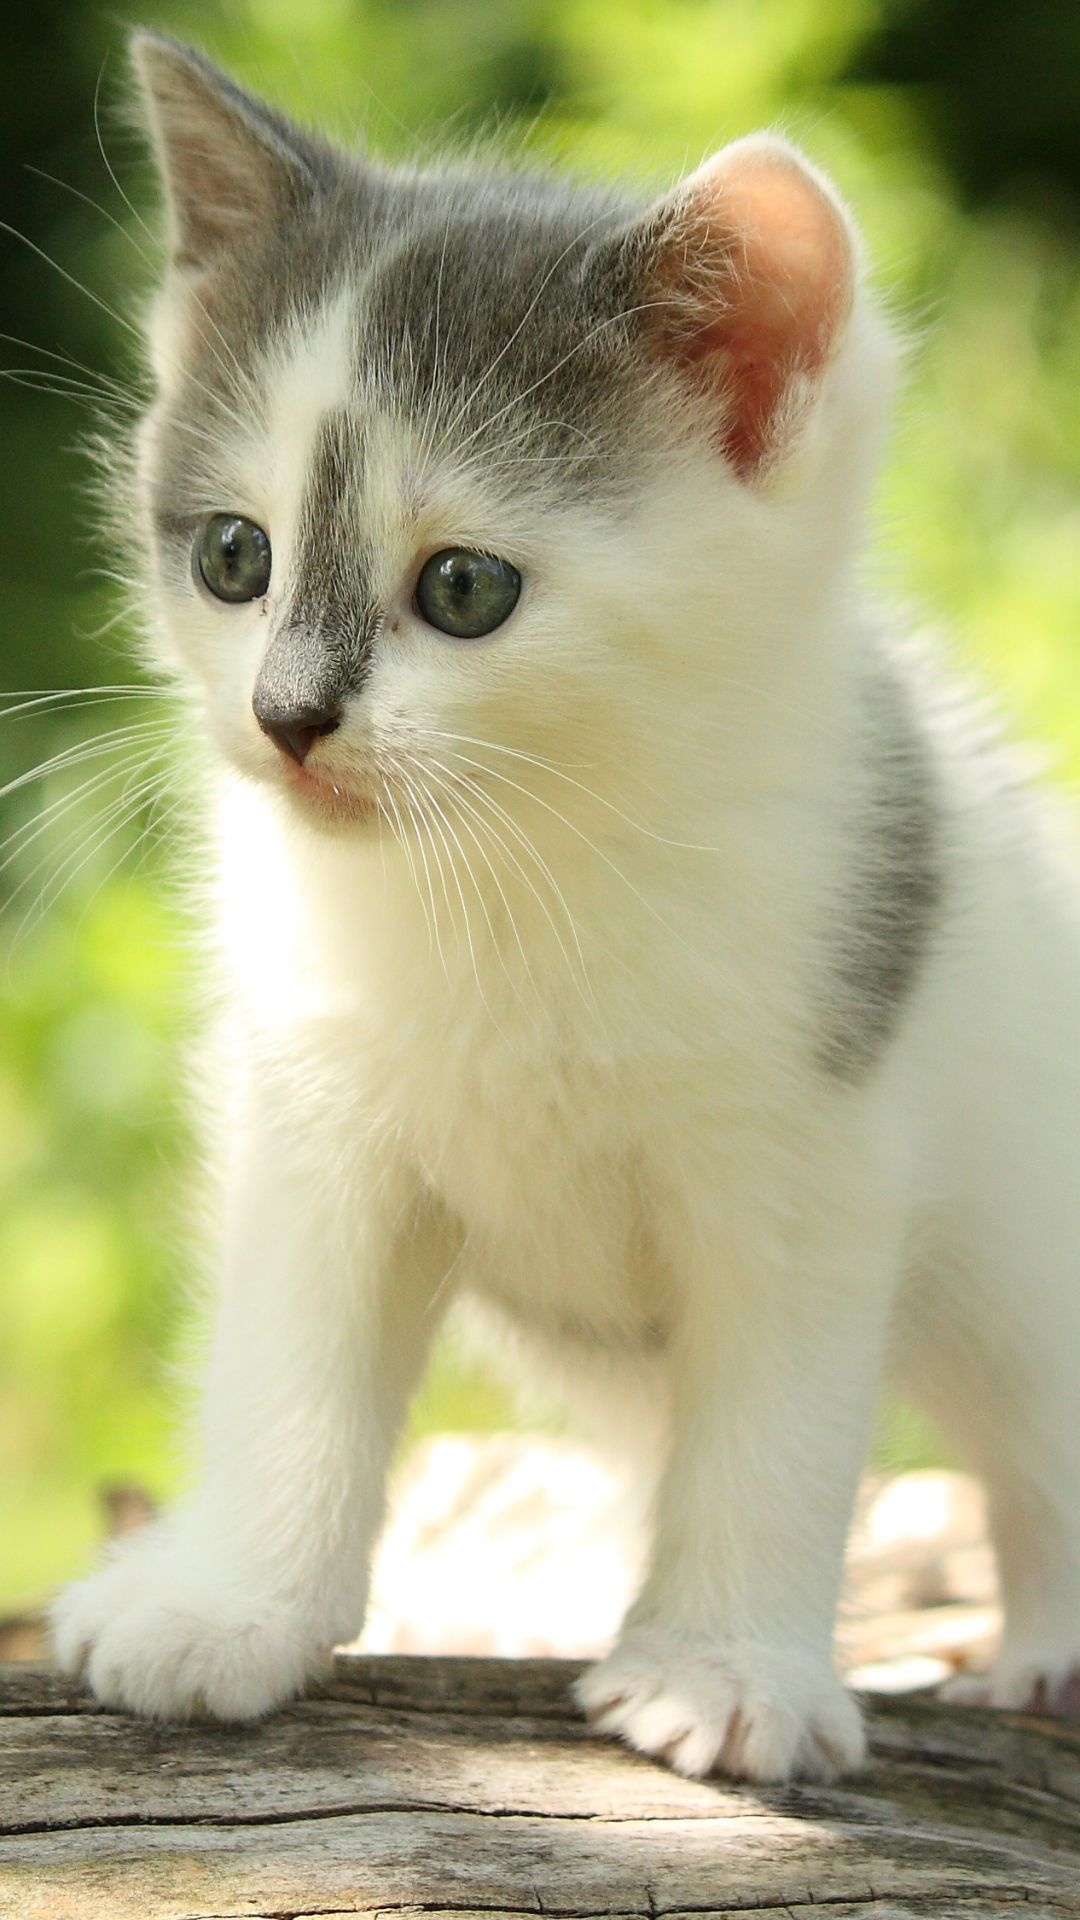 Baby Animal, Cute animal wallpapers, Cat and puppies, Sweetness overload, 1080x1920 Full HD Handy